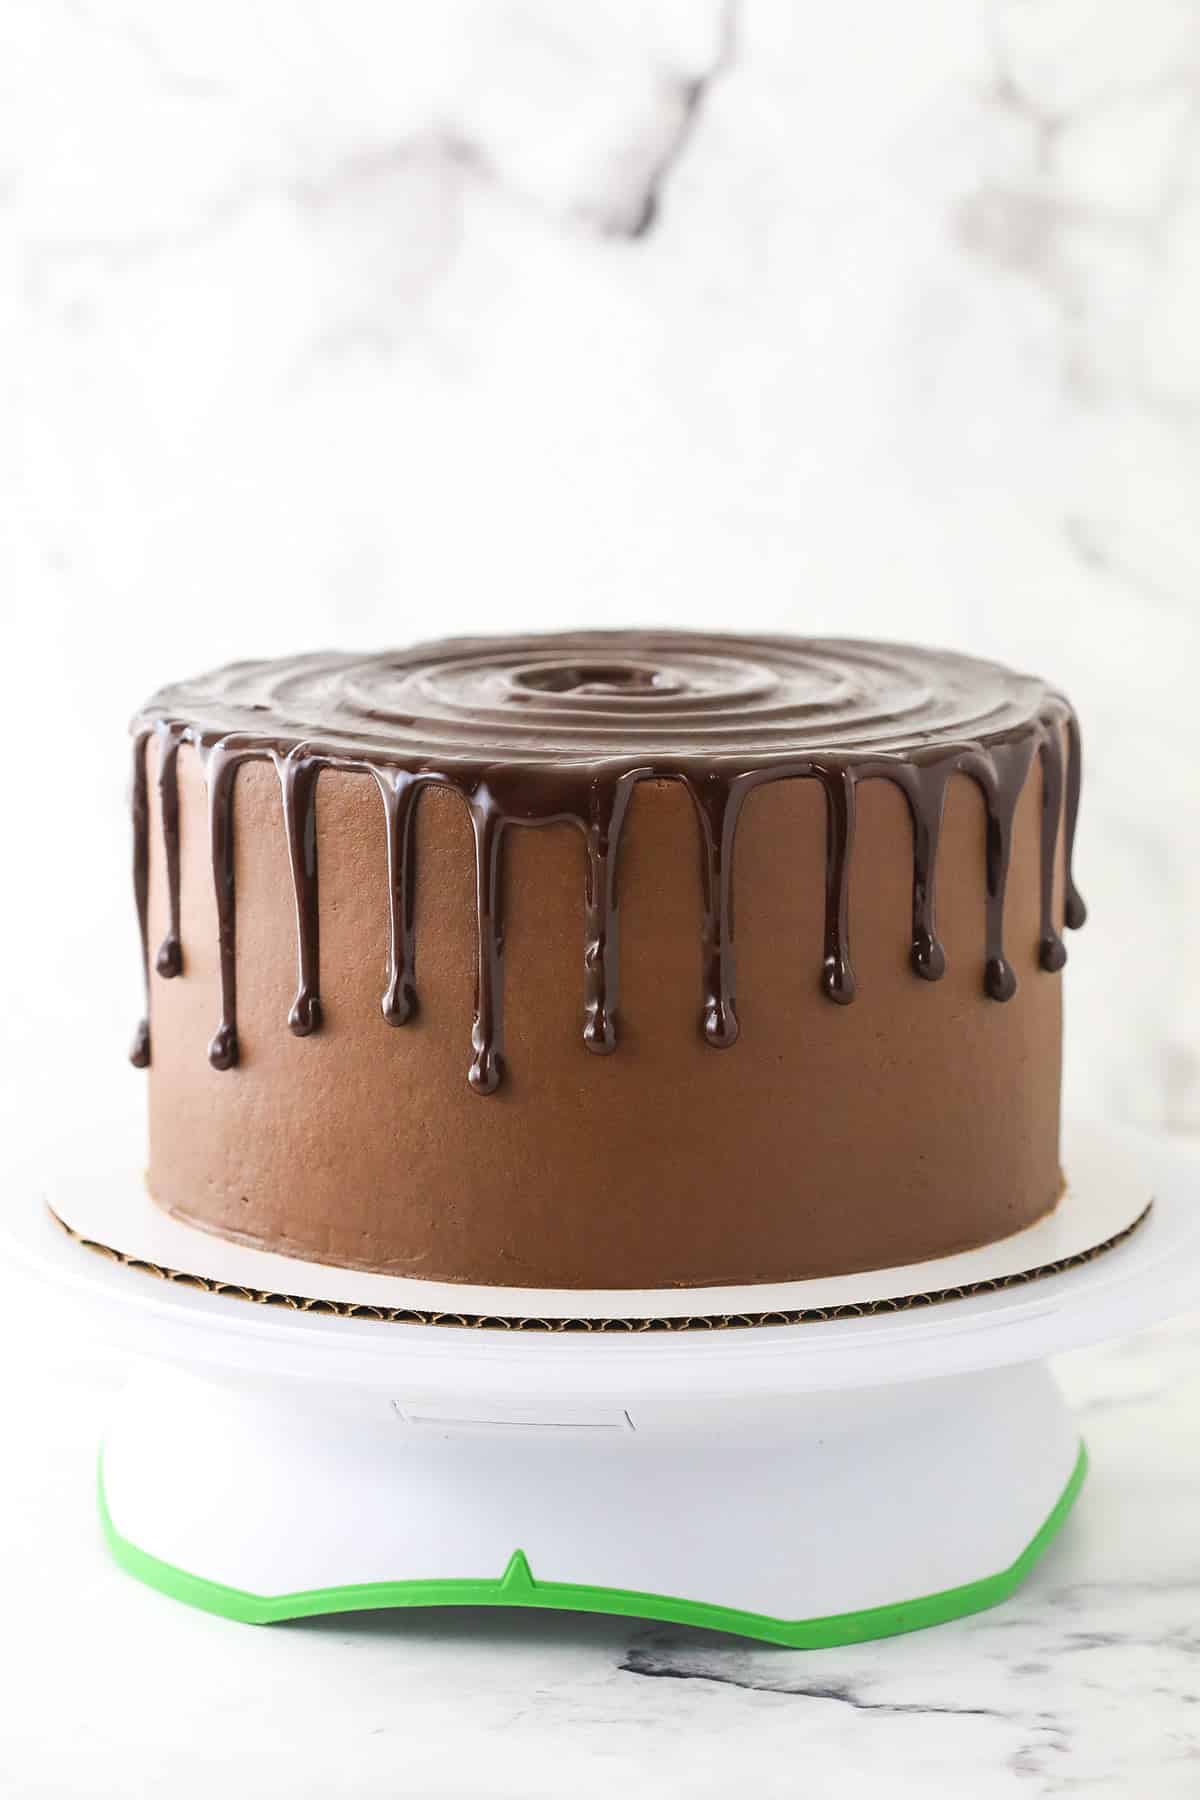 A frosted chocolate cake with ganache on top